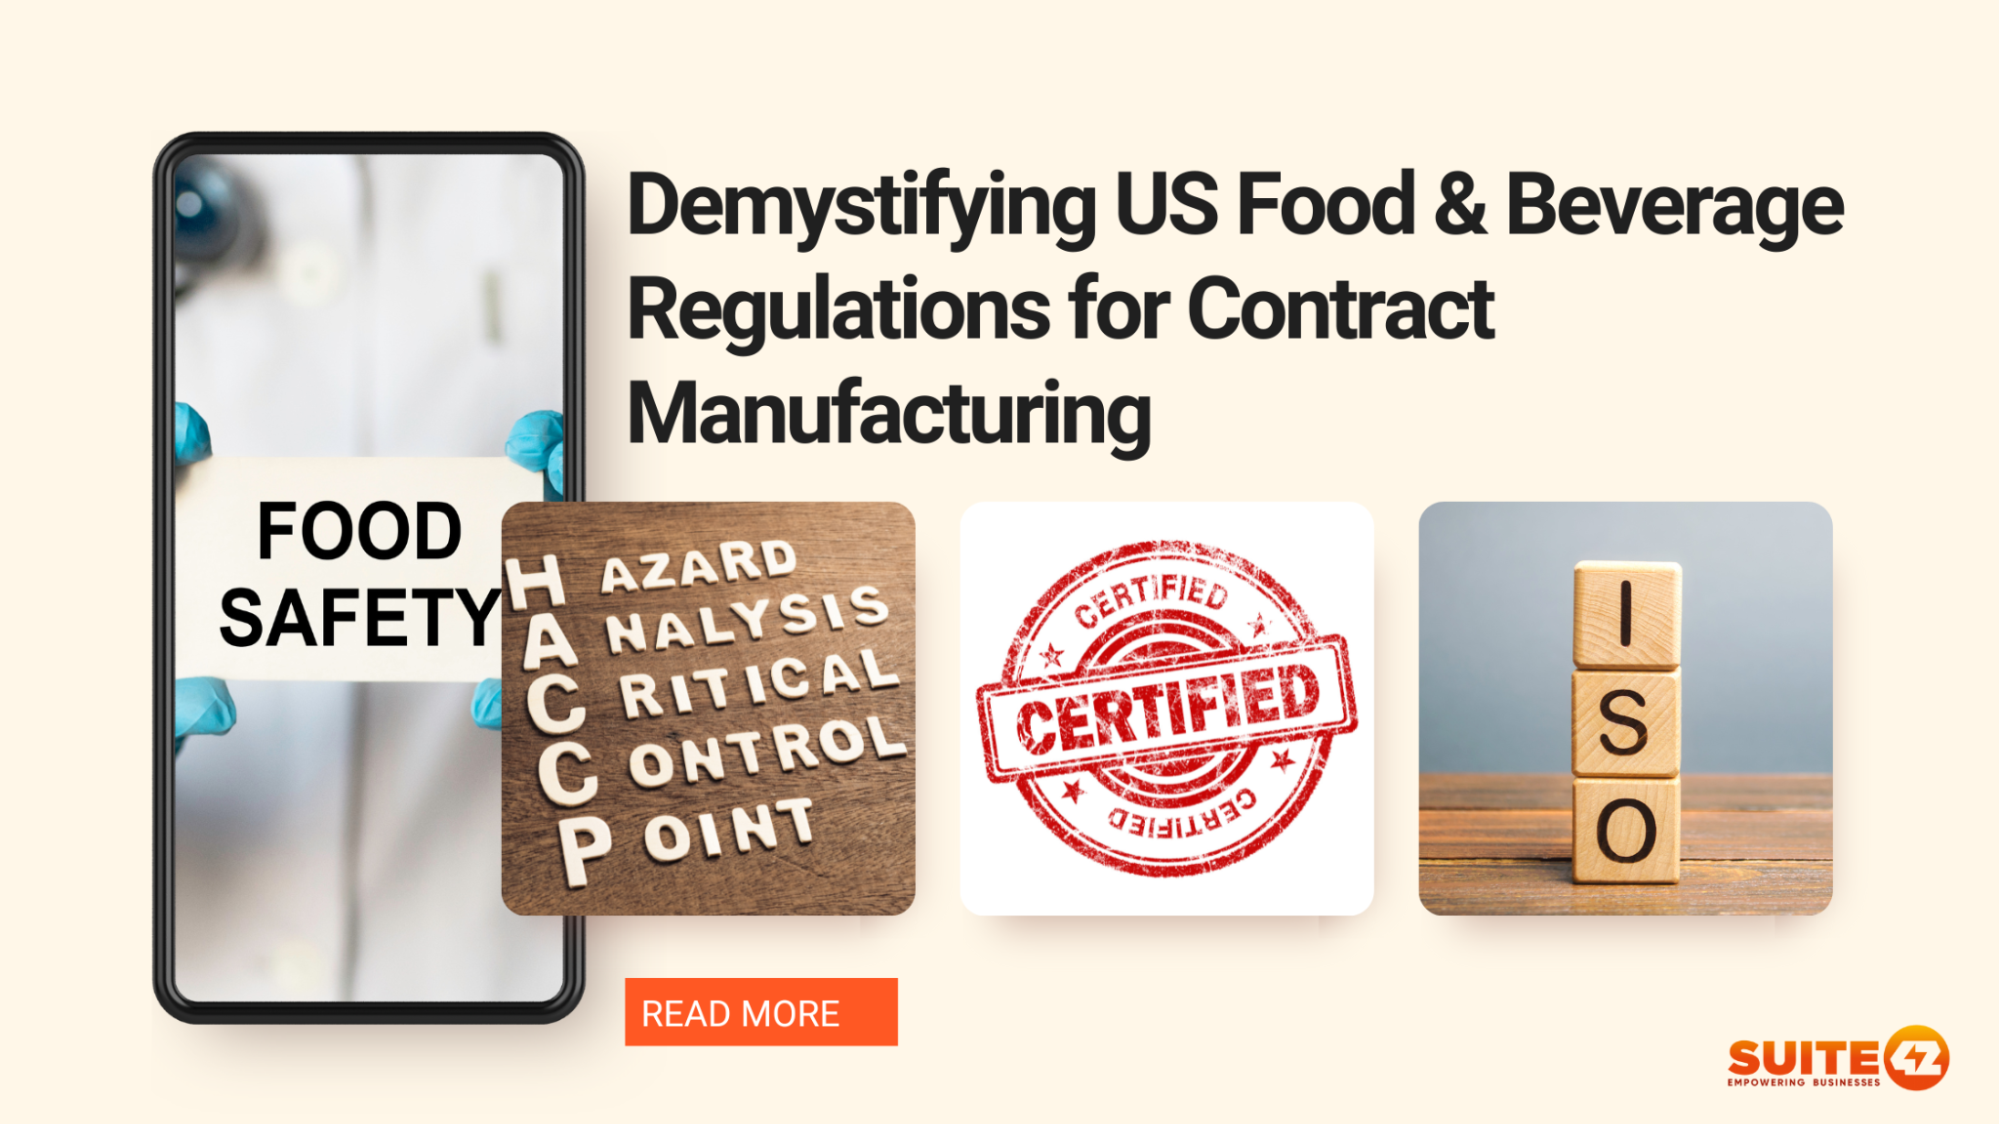 US Food & Beverage Regulations for Contract Manufacturing